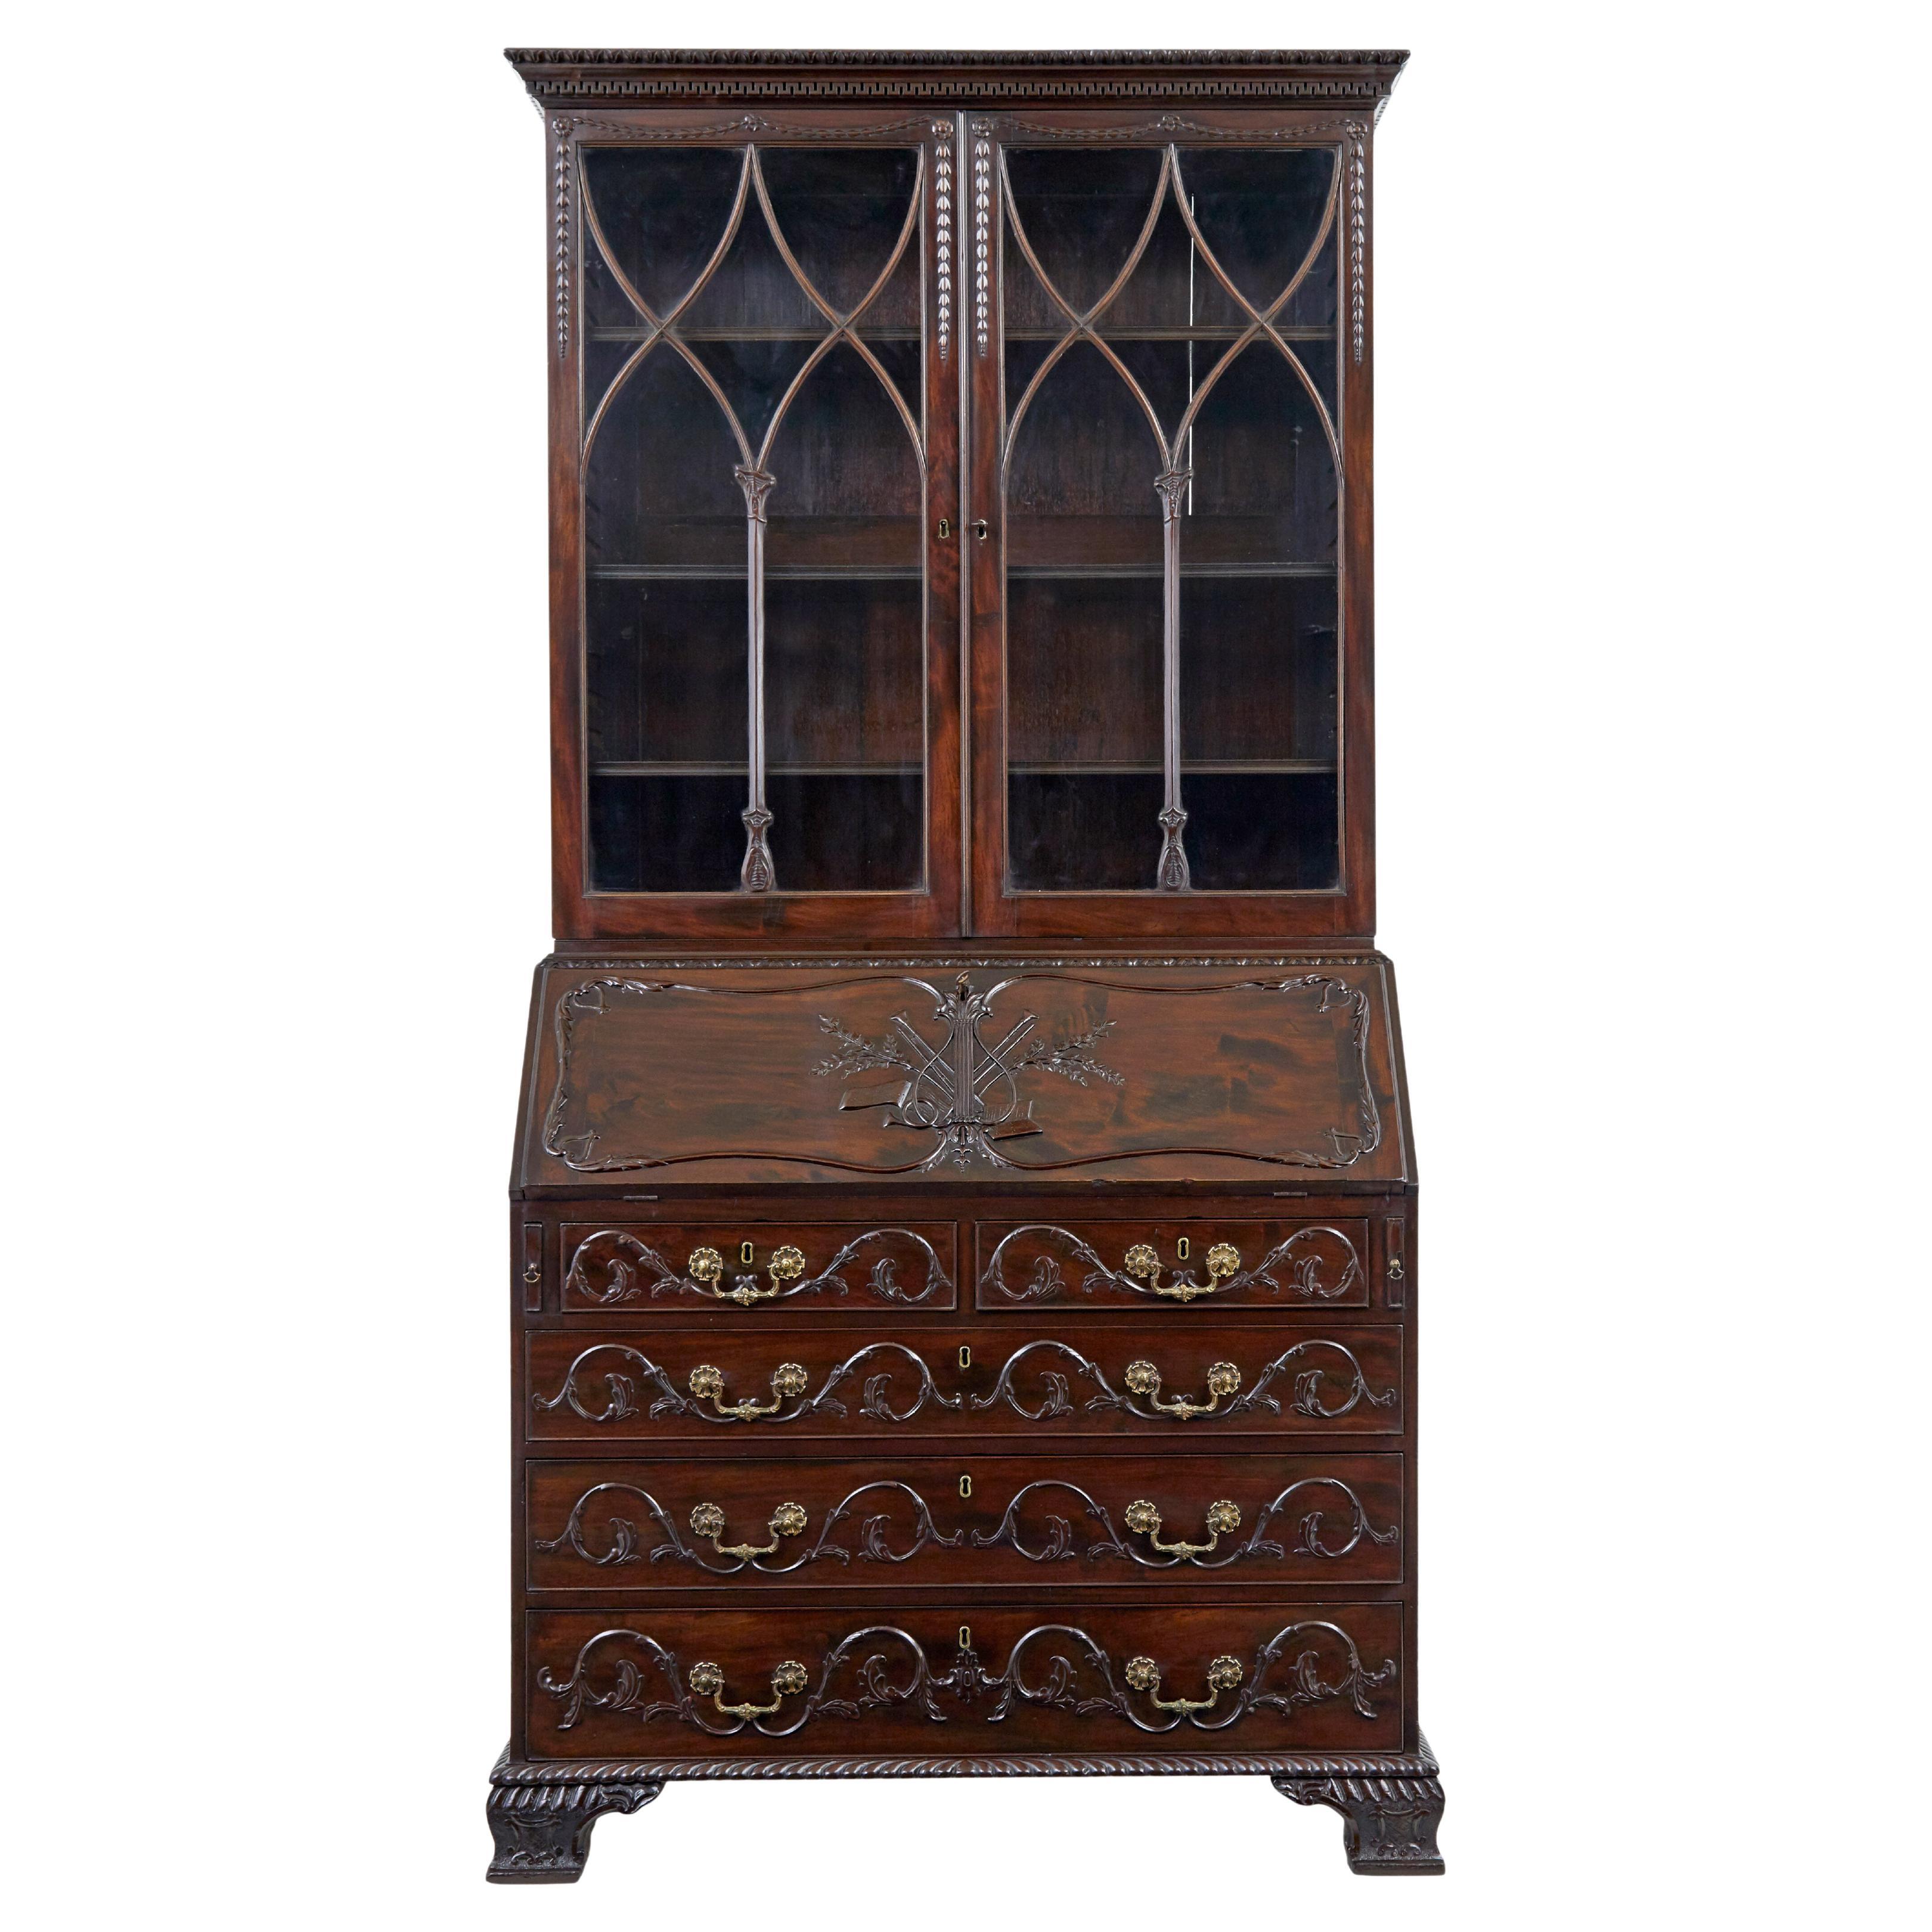 Early 19th century carved mahogany bureau bookcase For Sale